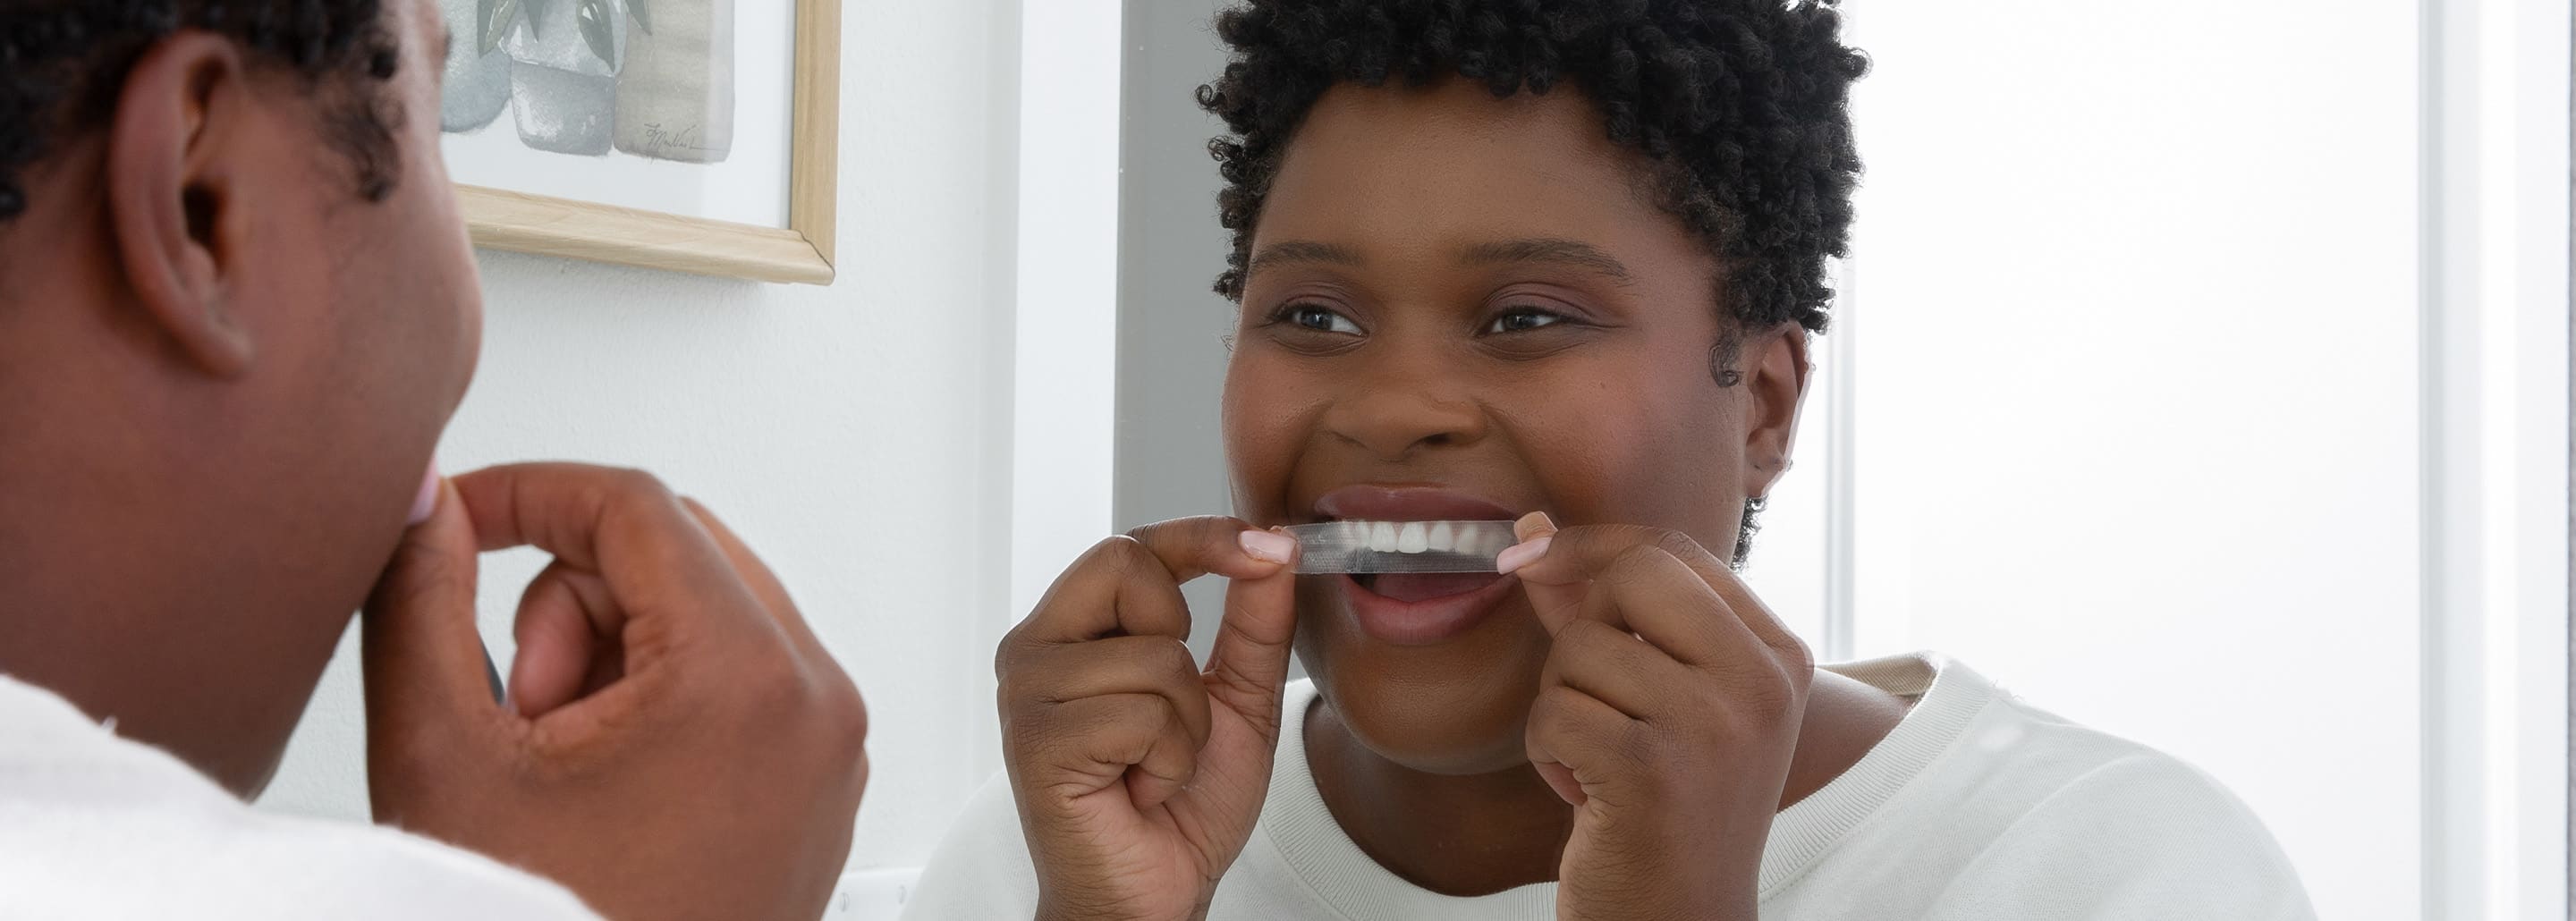 Foaming or Excessive Saliva while Using Whitestrips - Crest